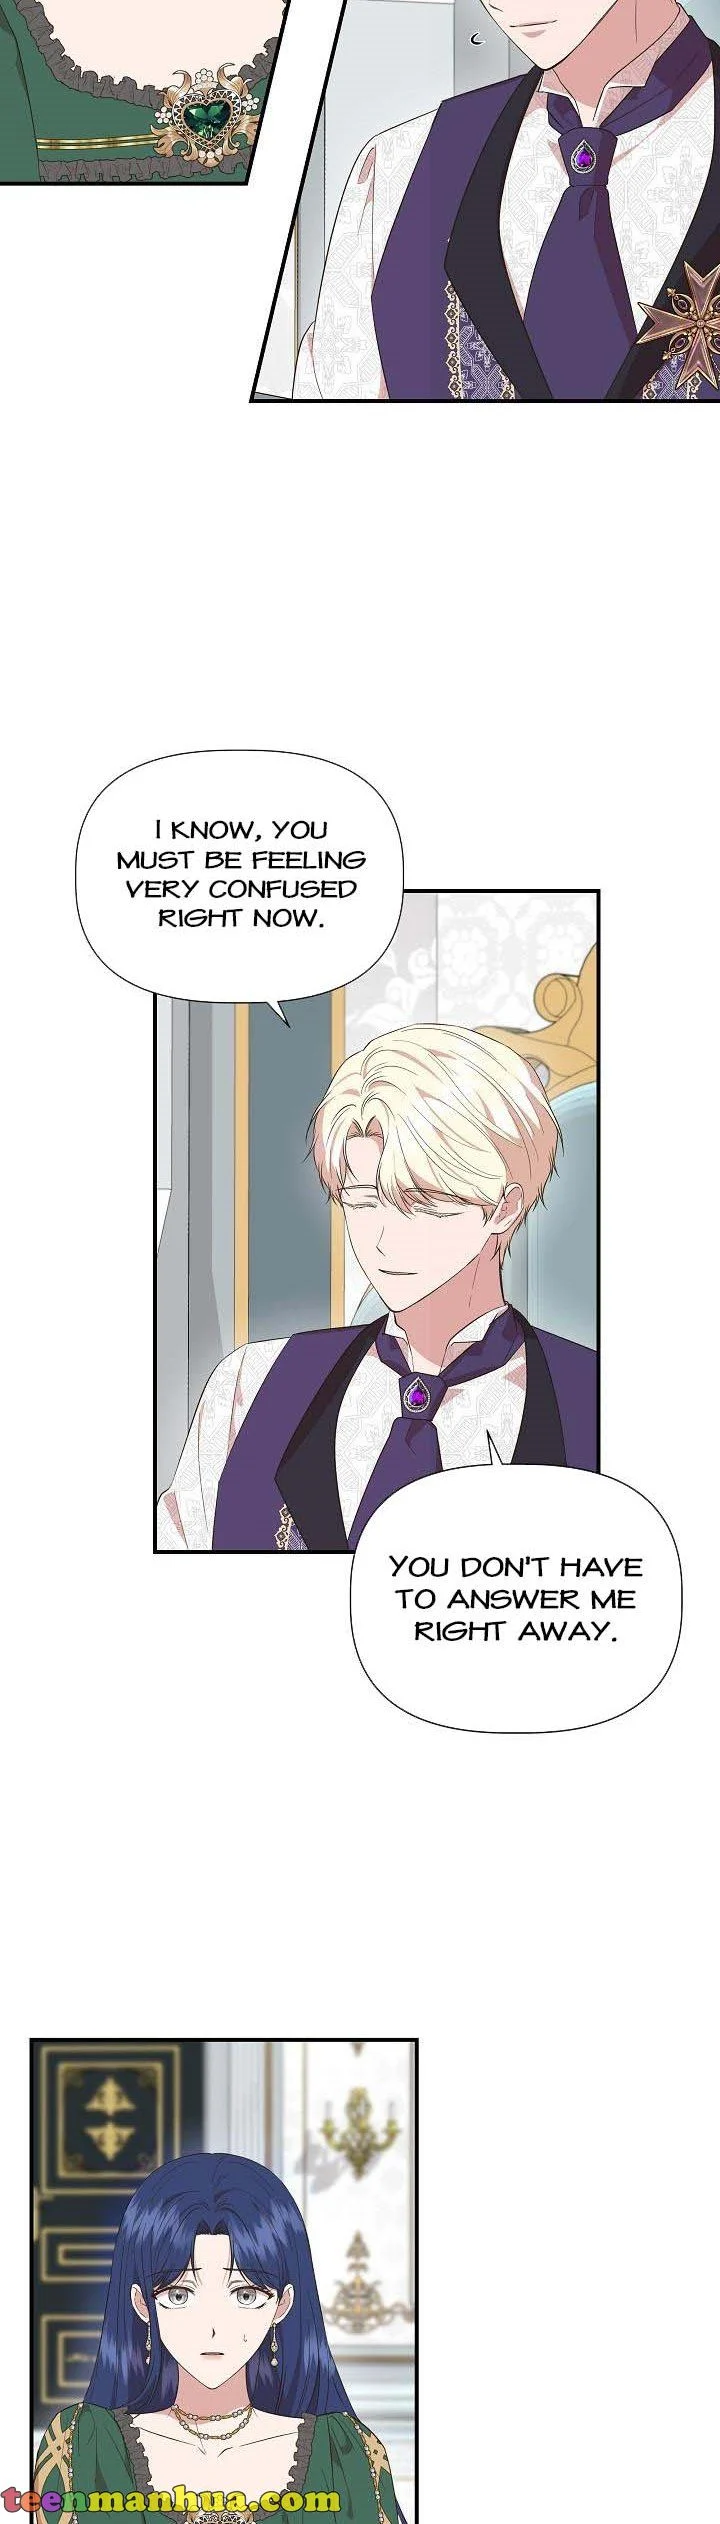 Cinderella Wasn’t Me chapter 78